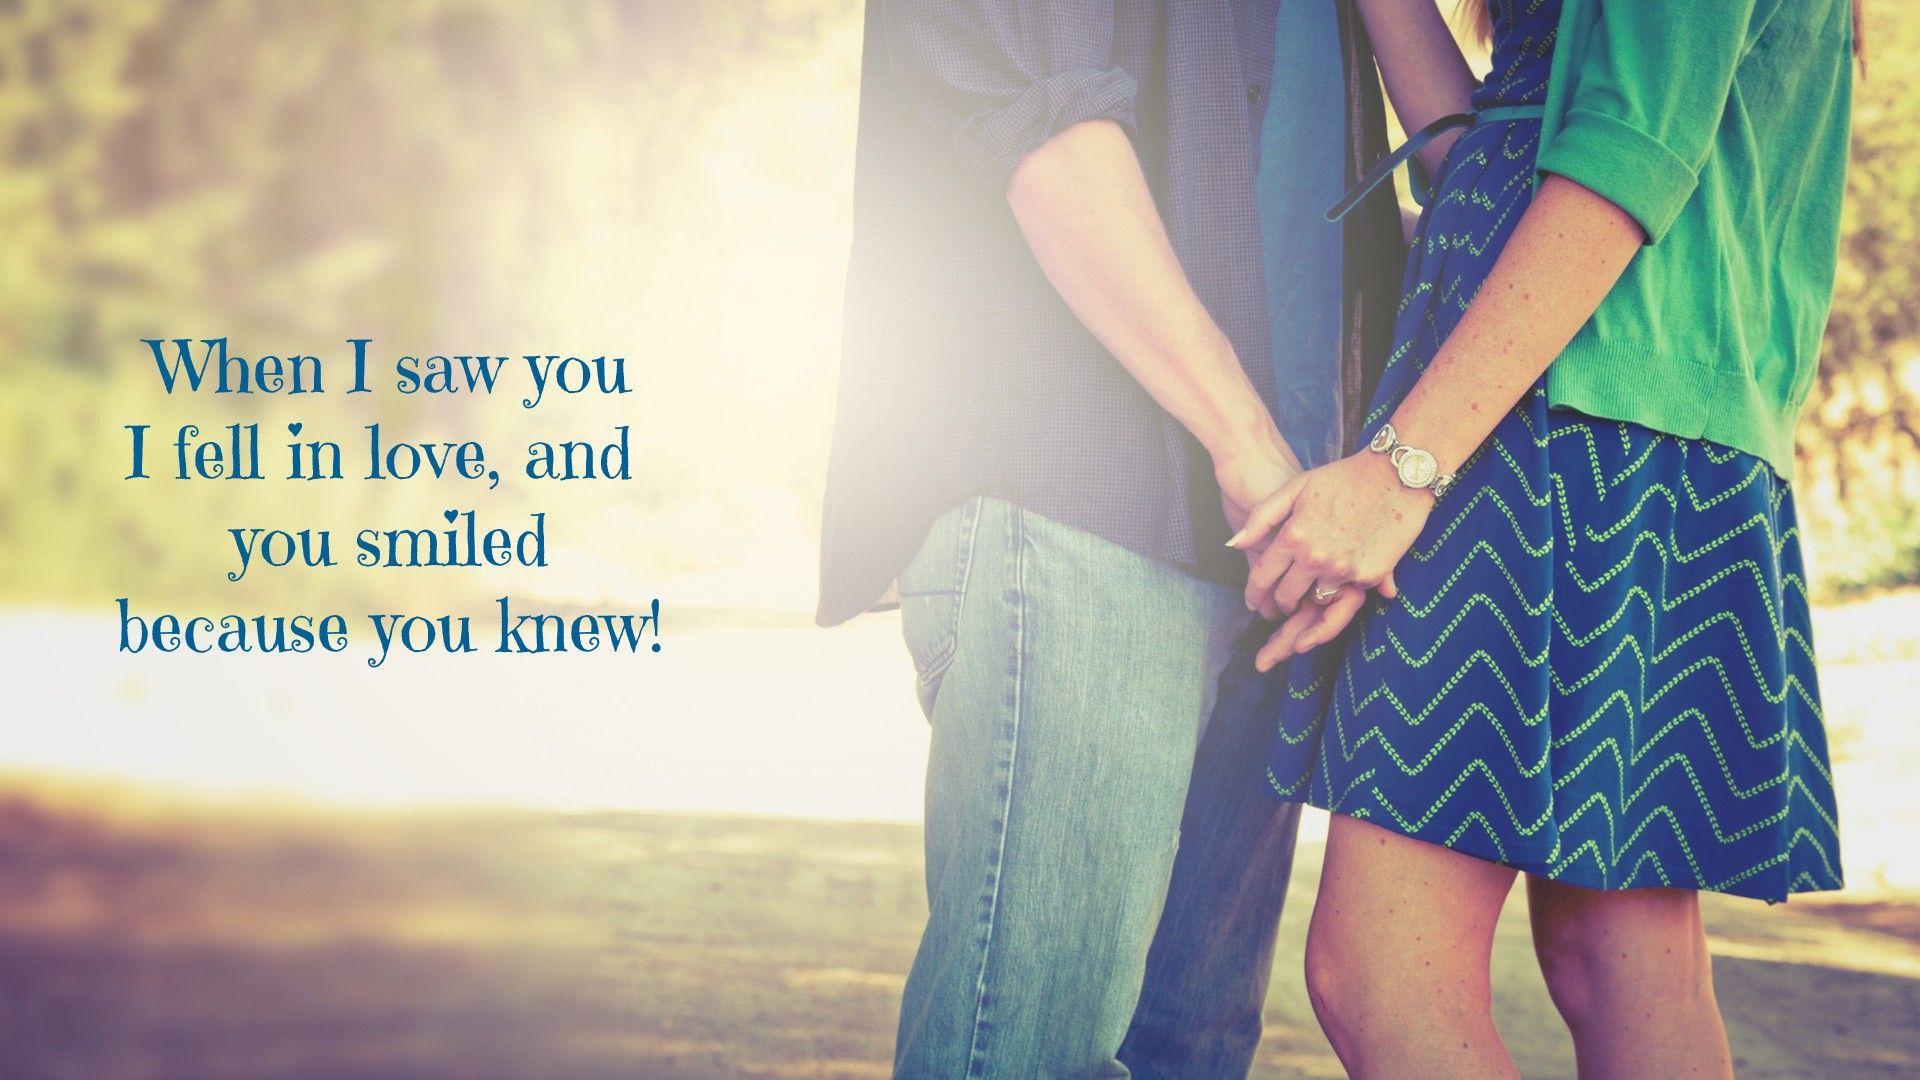 Cute Couple Wallpaper With Quotes 1080p. Cute Wallpaper